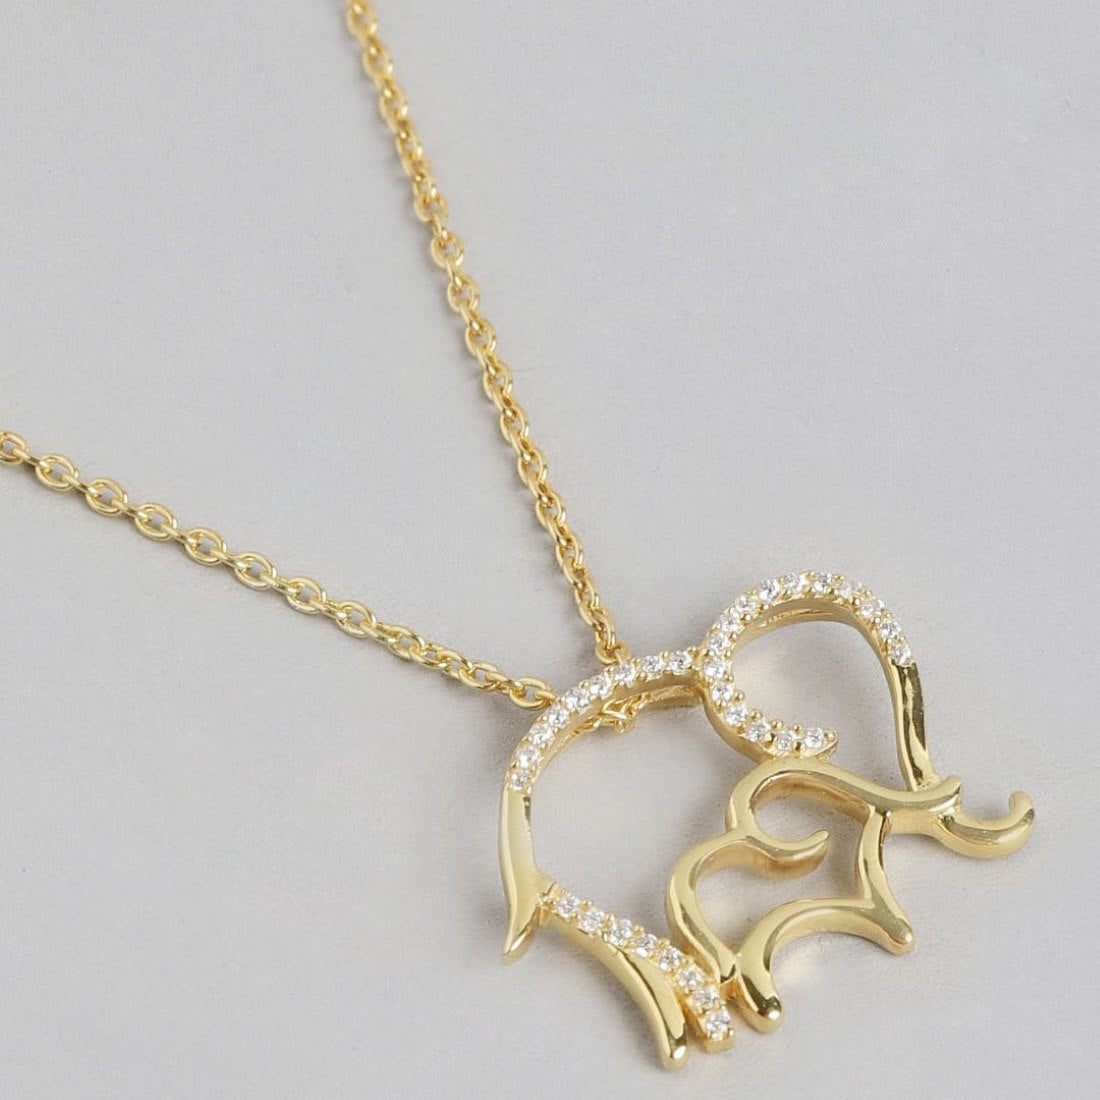 Majestic Elephant Harmony Gold Plated 925 Sterling Silver Necklace Chain